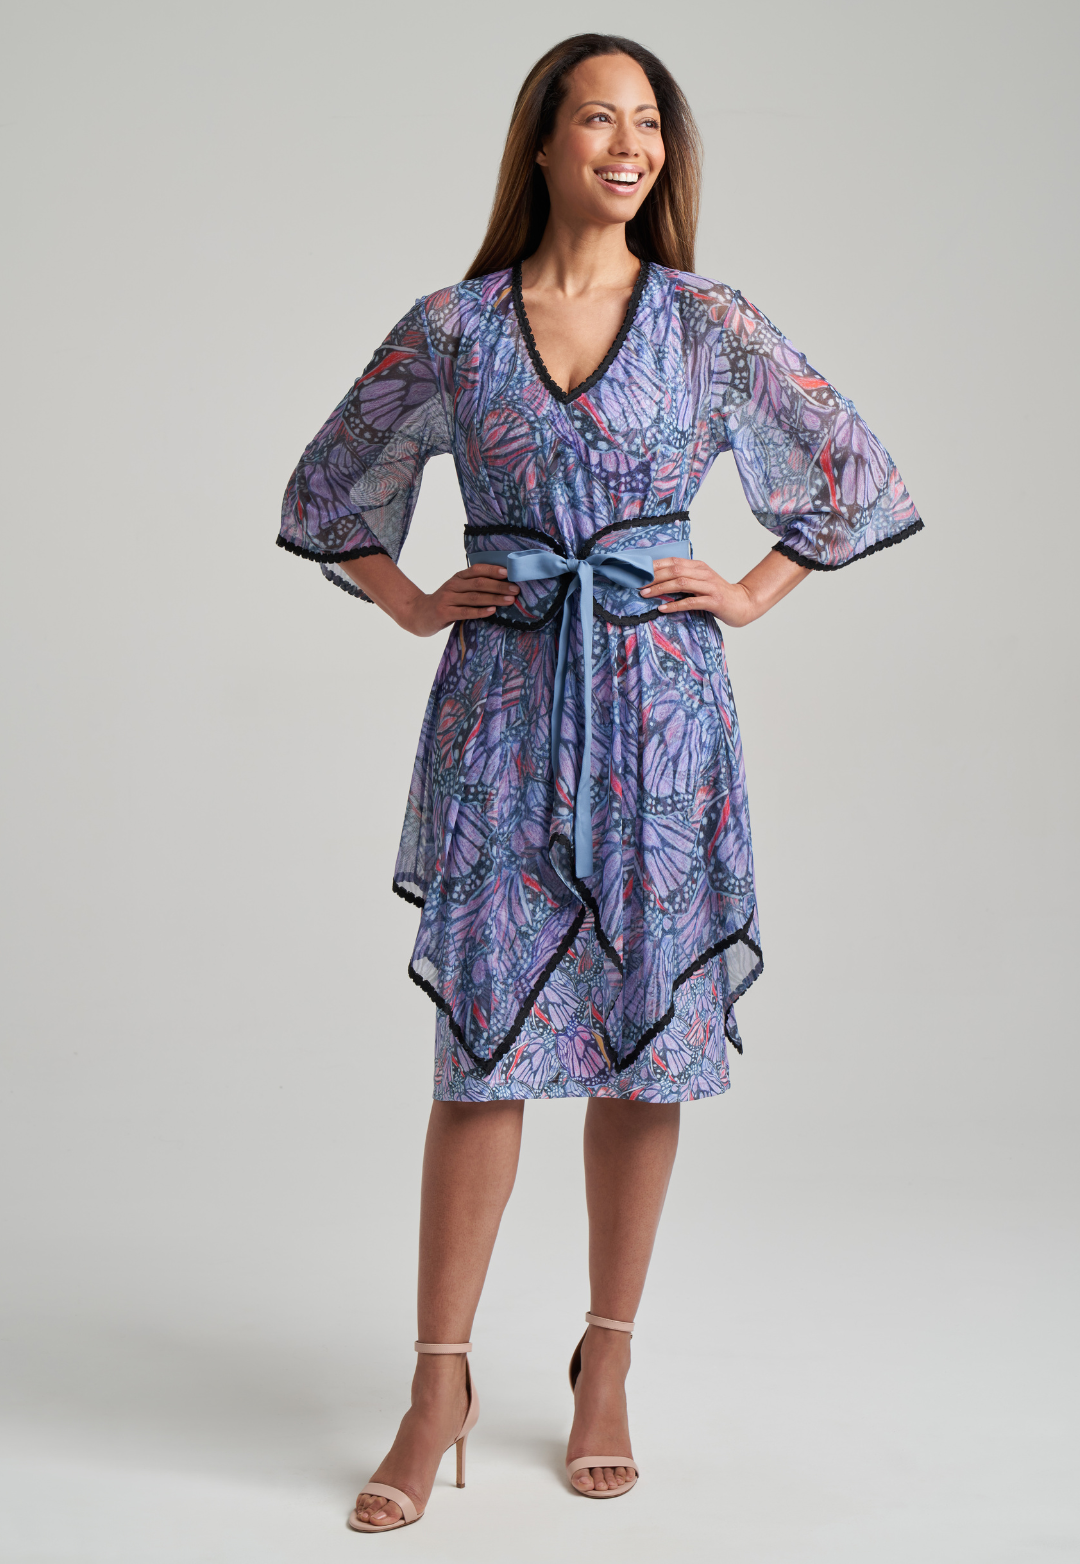 Woman wearing stretch knit butterfly printed short dress under butterfly printed mesh poncho with black trim and belt by Ala von Auersperg for spring summer 2021